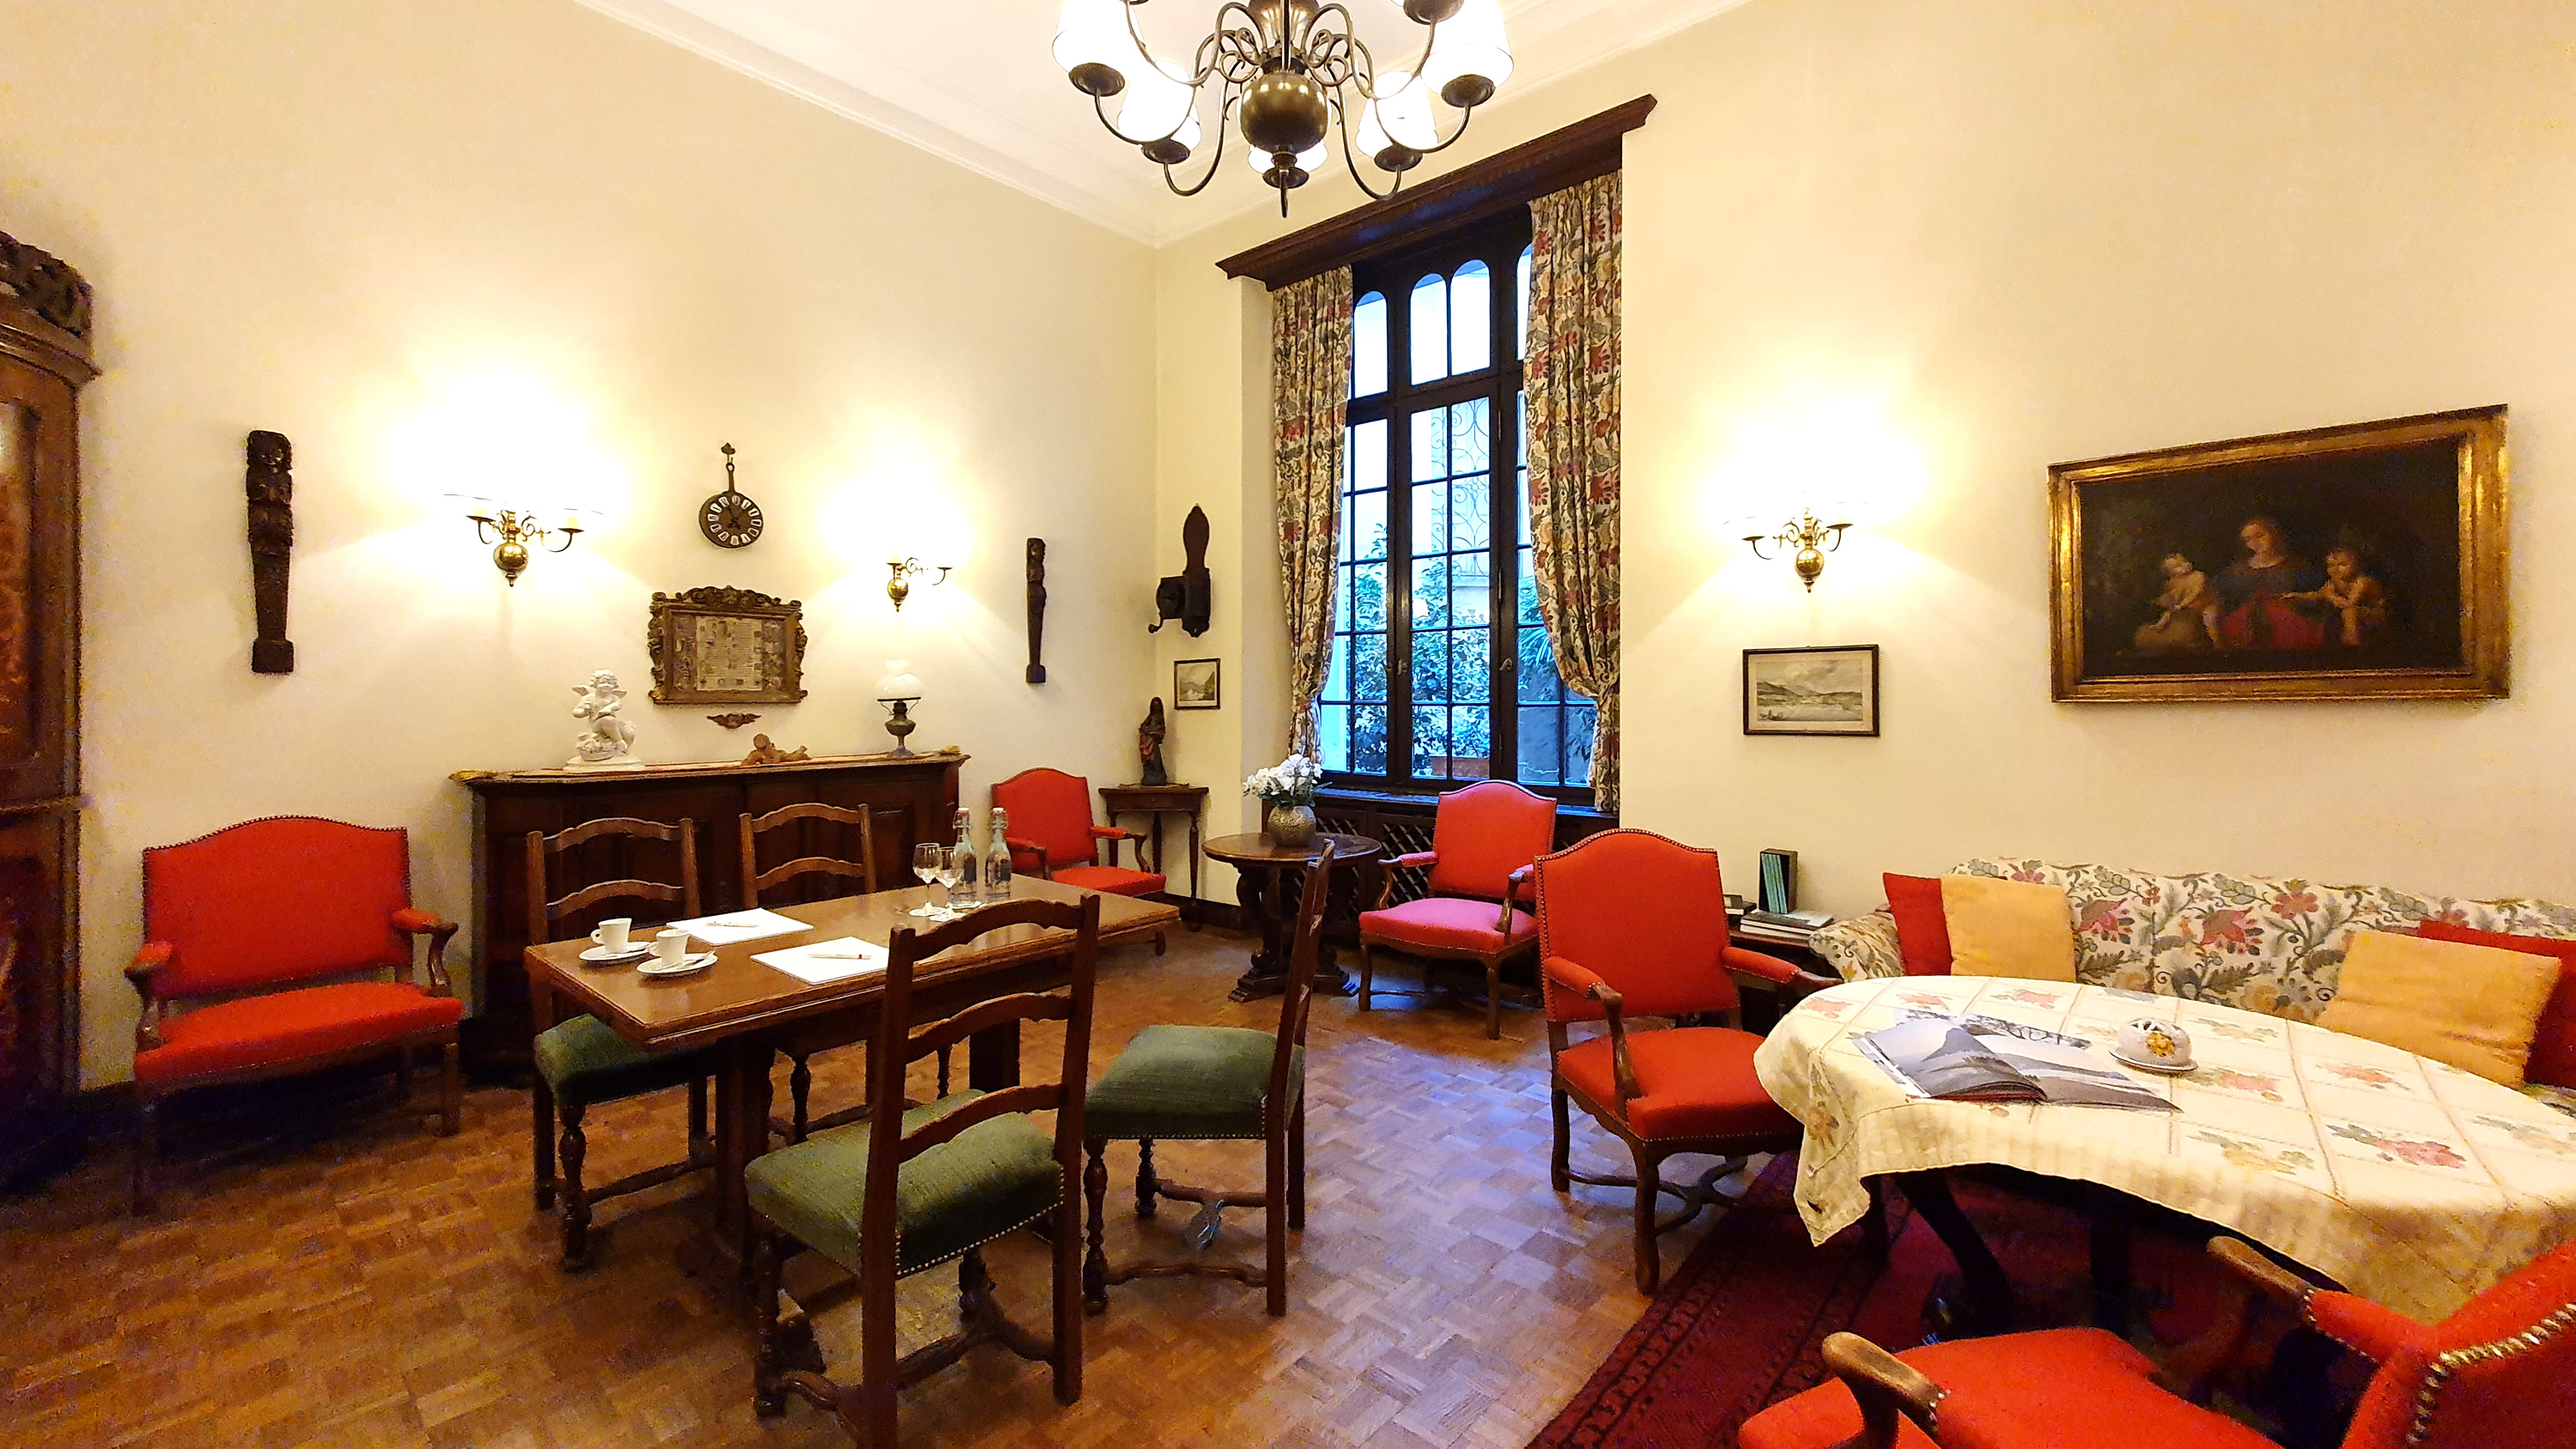 Small conference room for workshops and private meetings in the centre of Lugano close to public transport